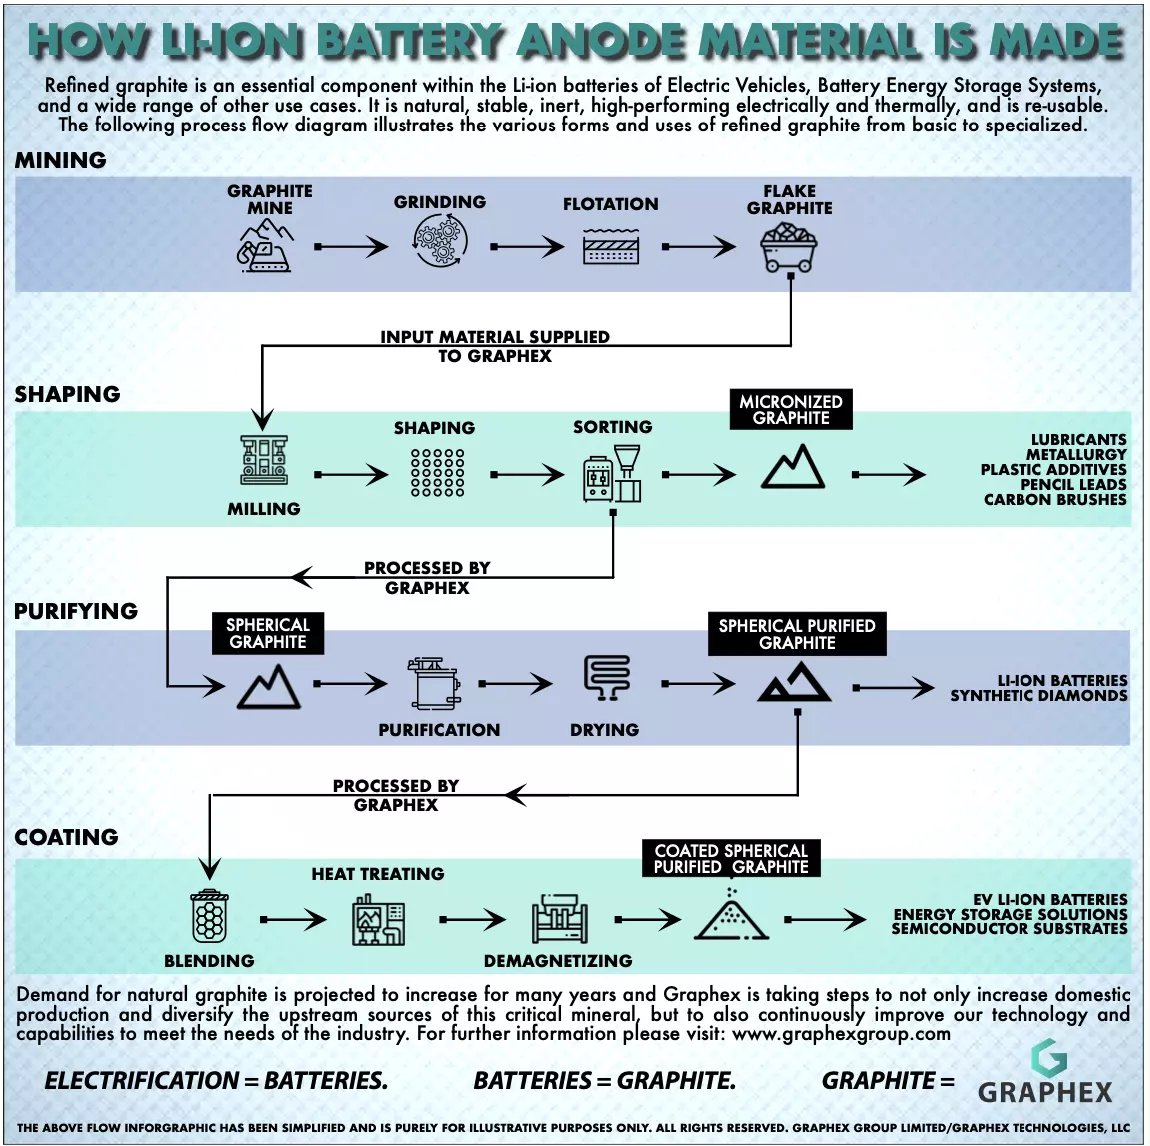 How li ion battery anode material is made infographic